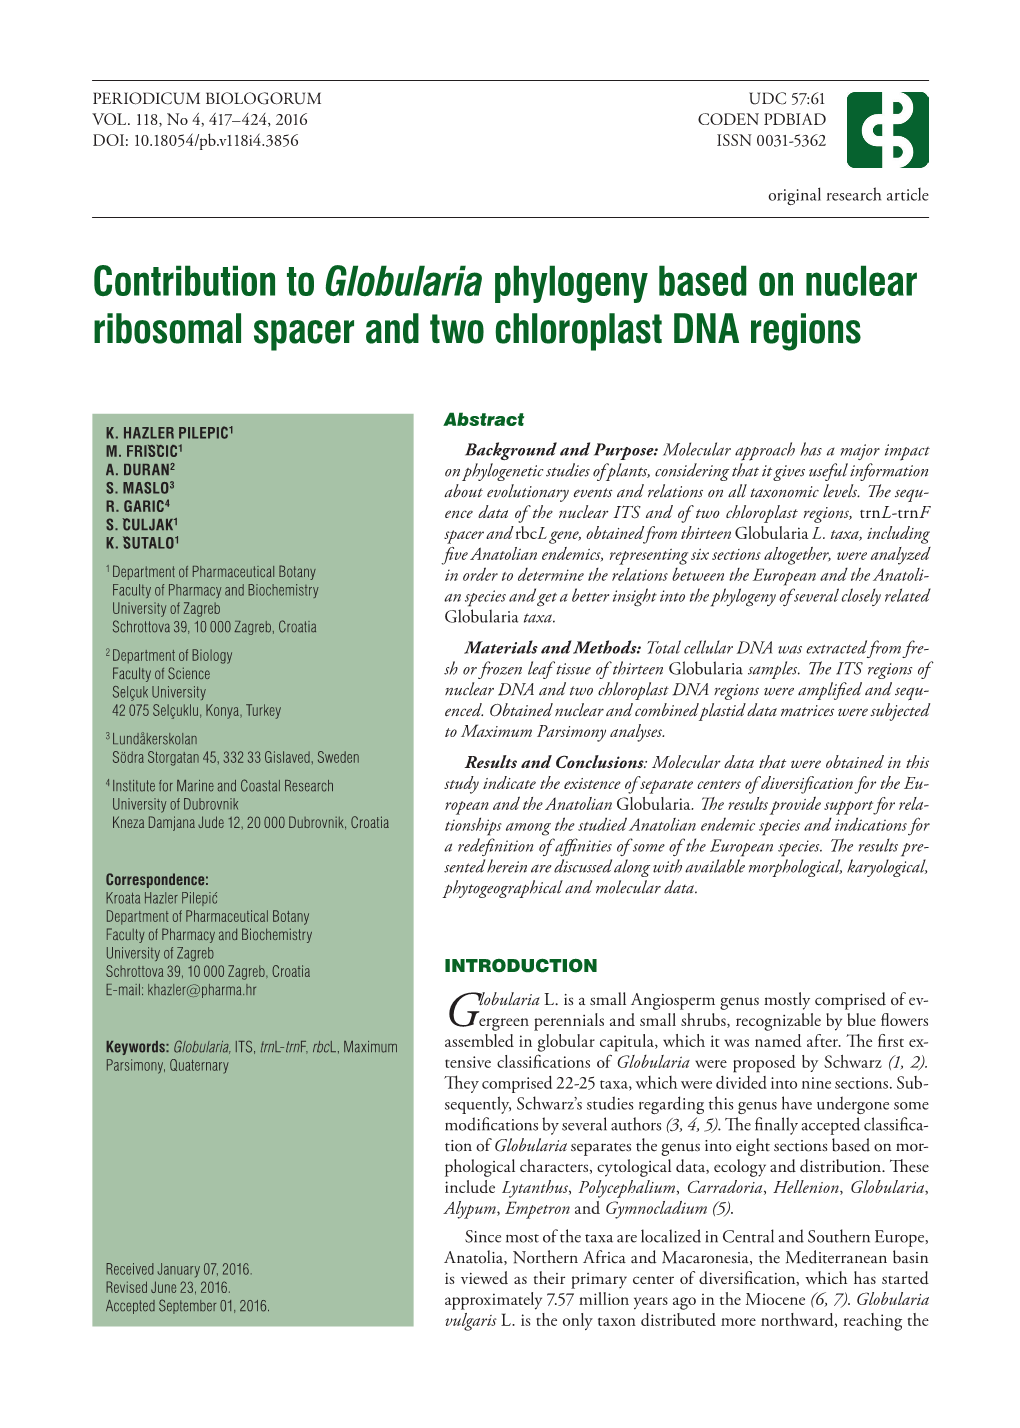 Contribution to Globularia Phylogeny Based on Nuclear Ribosomal Spacer and Two Chloroplast DNA Regions